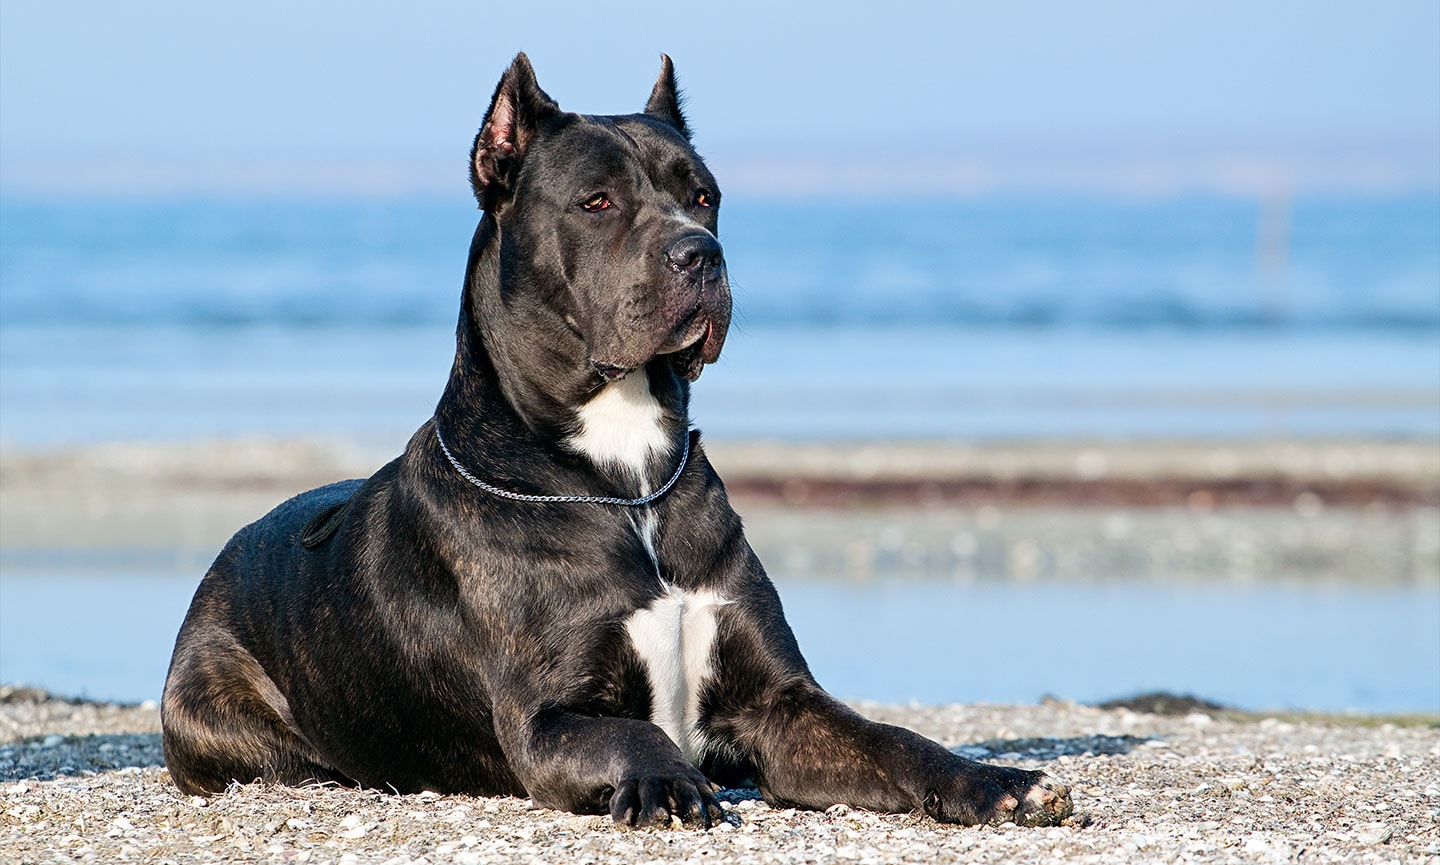 which breed is cane corso? 2